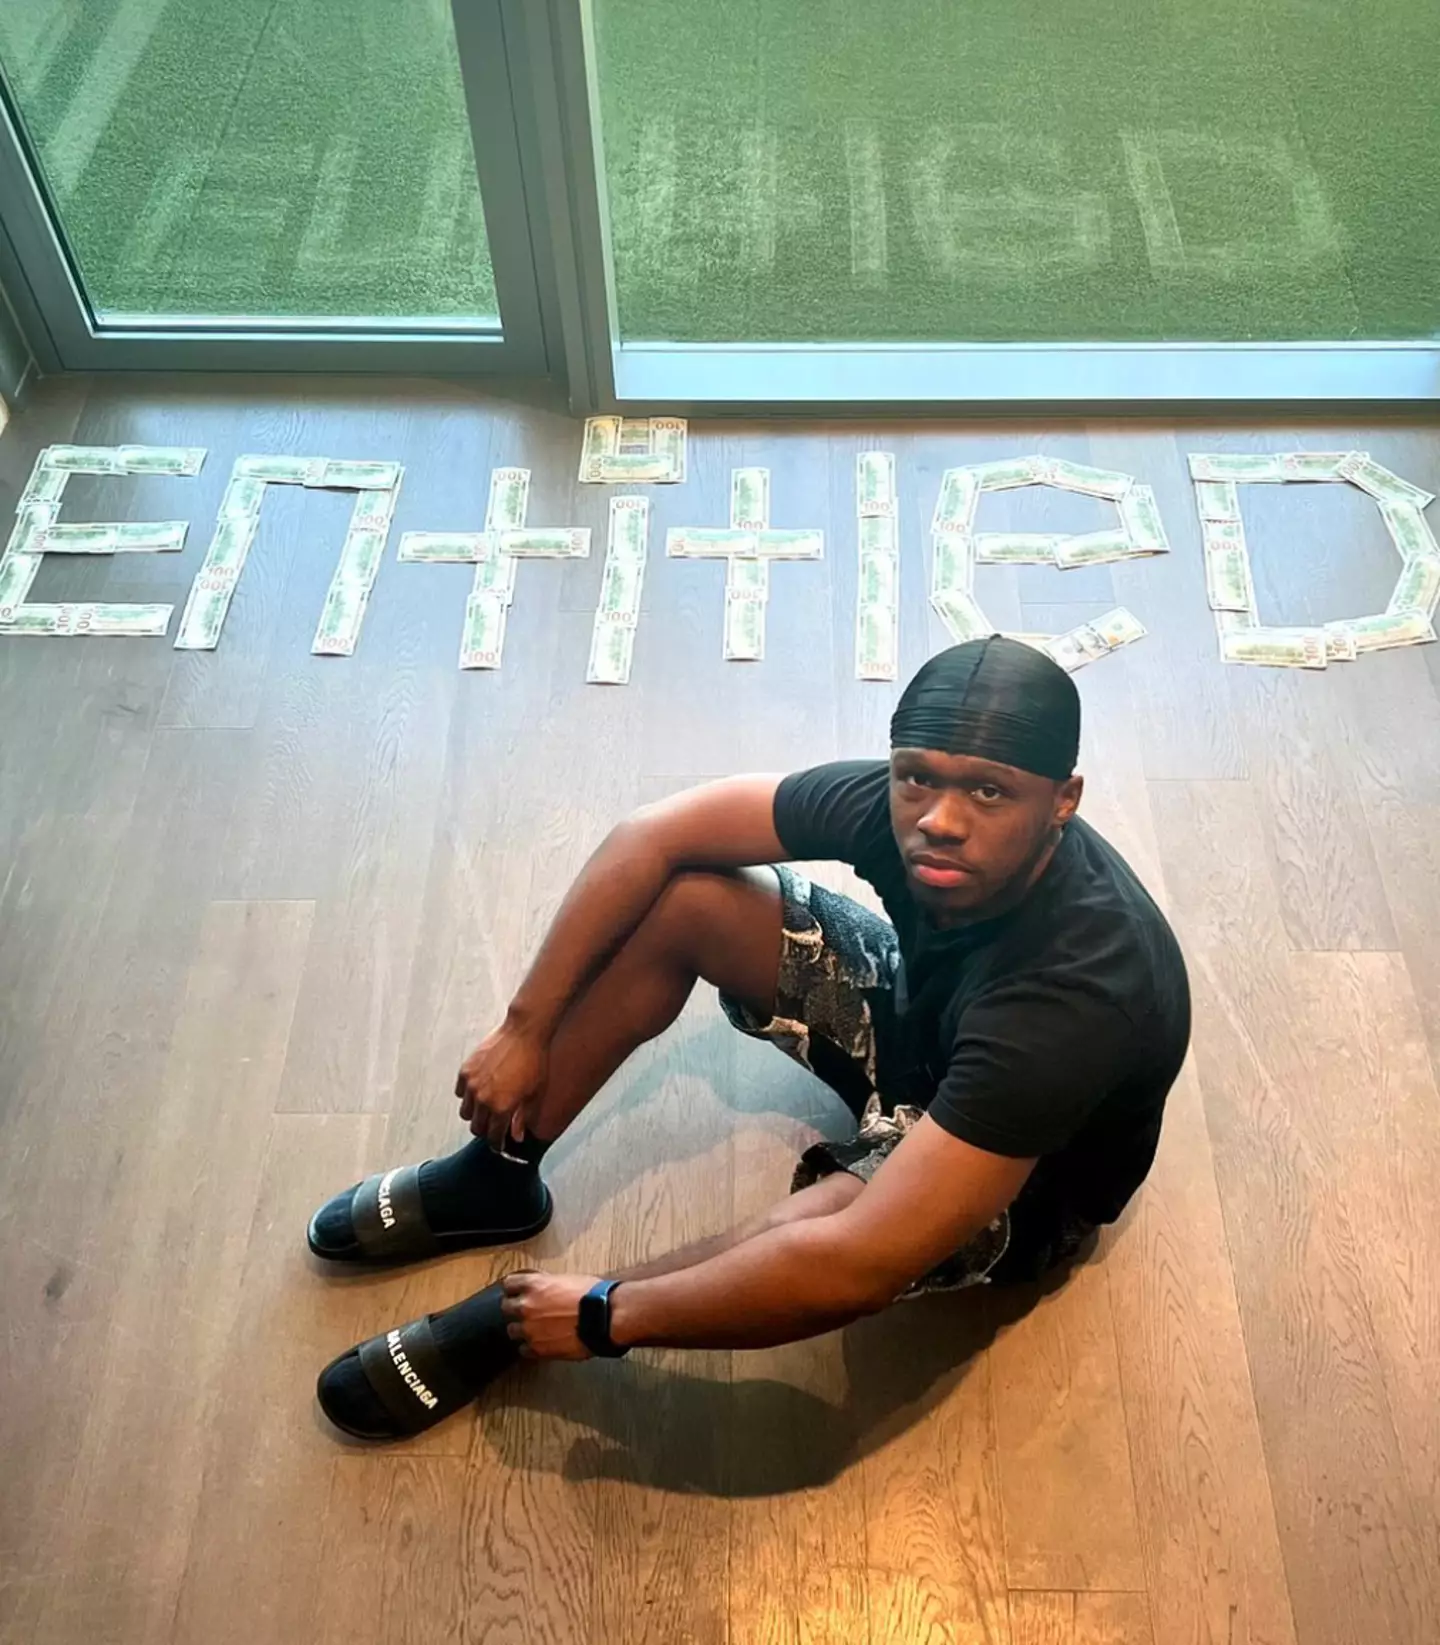 50 Cent’s eldest kid has offered to cough up one month of child support in return for 24 hours of the rapper’s time.